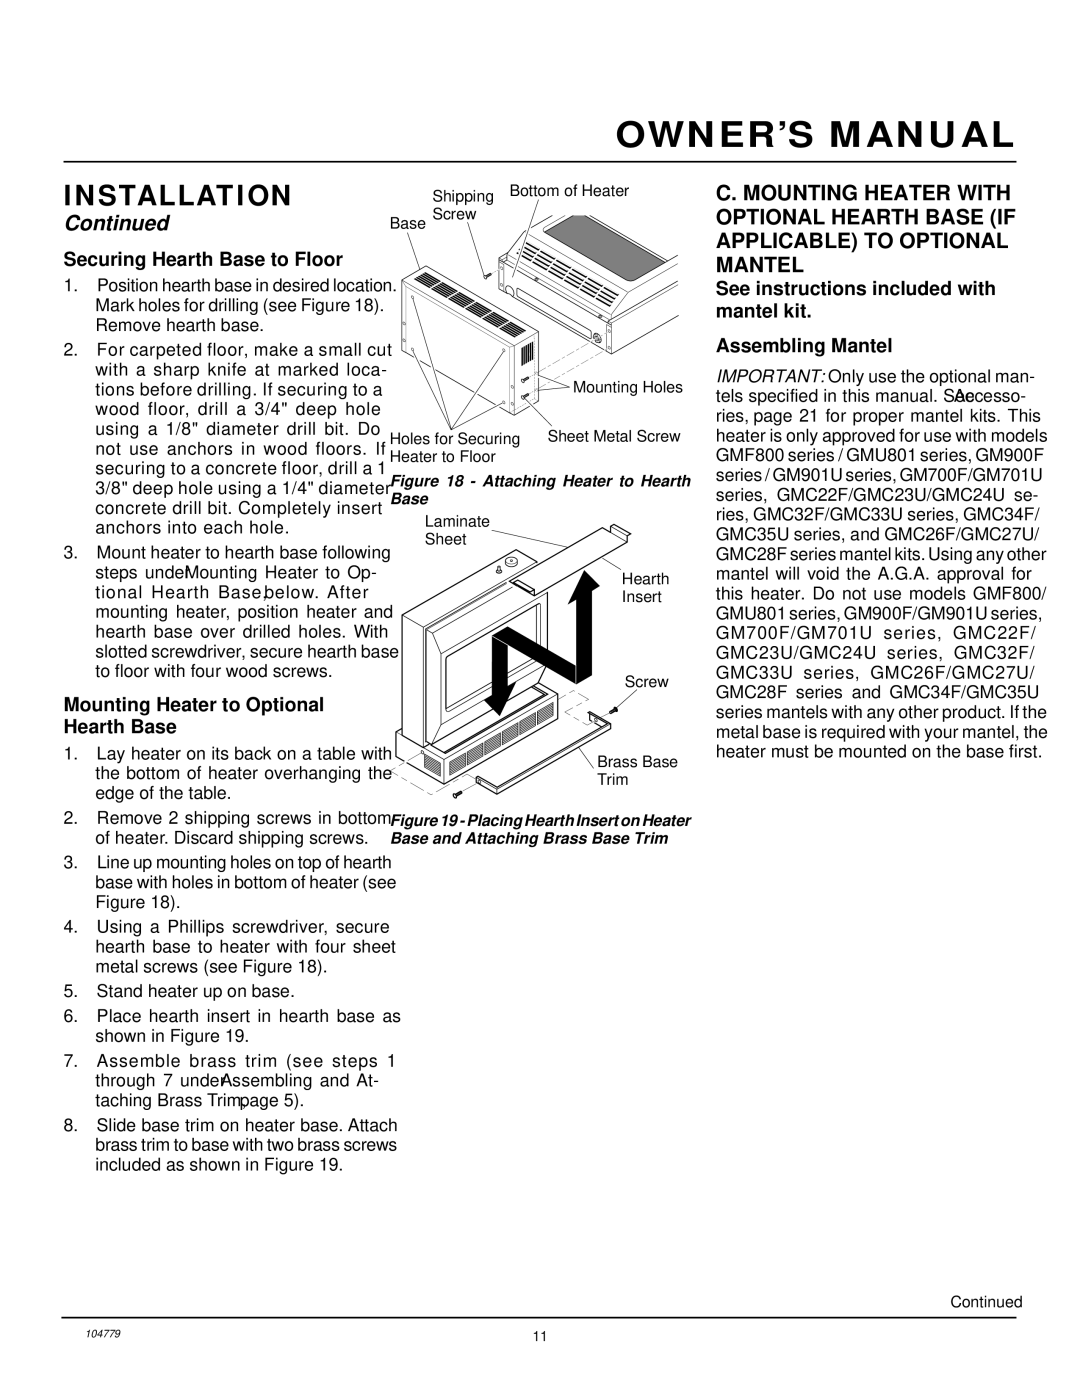 Desa Tech RFN28TD installation manual Securing Hearth Base to Floor, Mounting Heater to Optional Hearth Base 